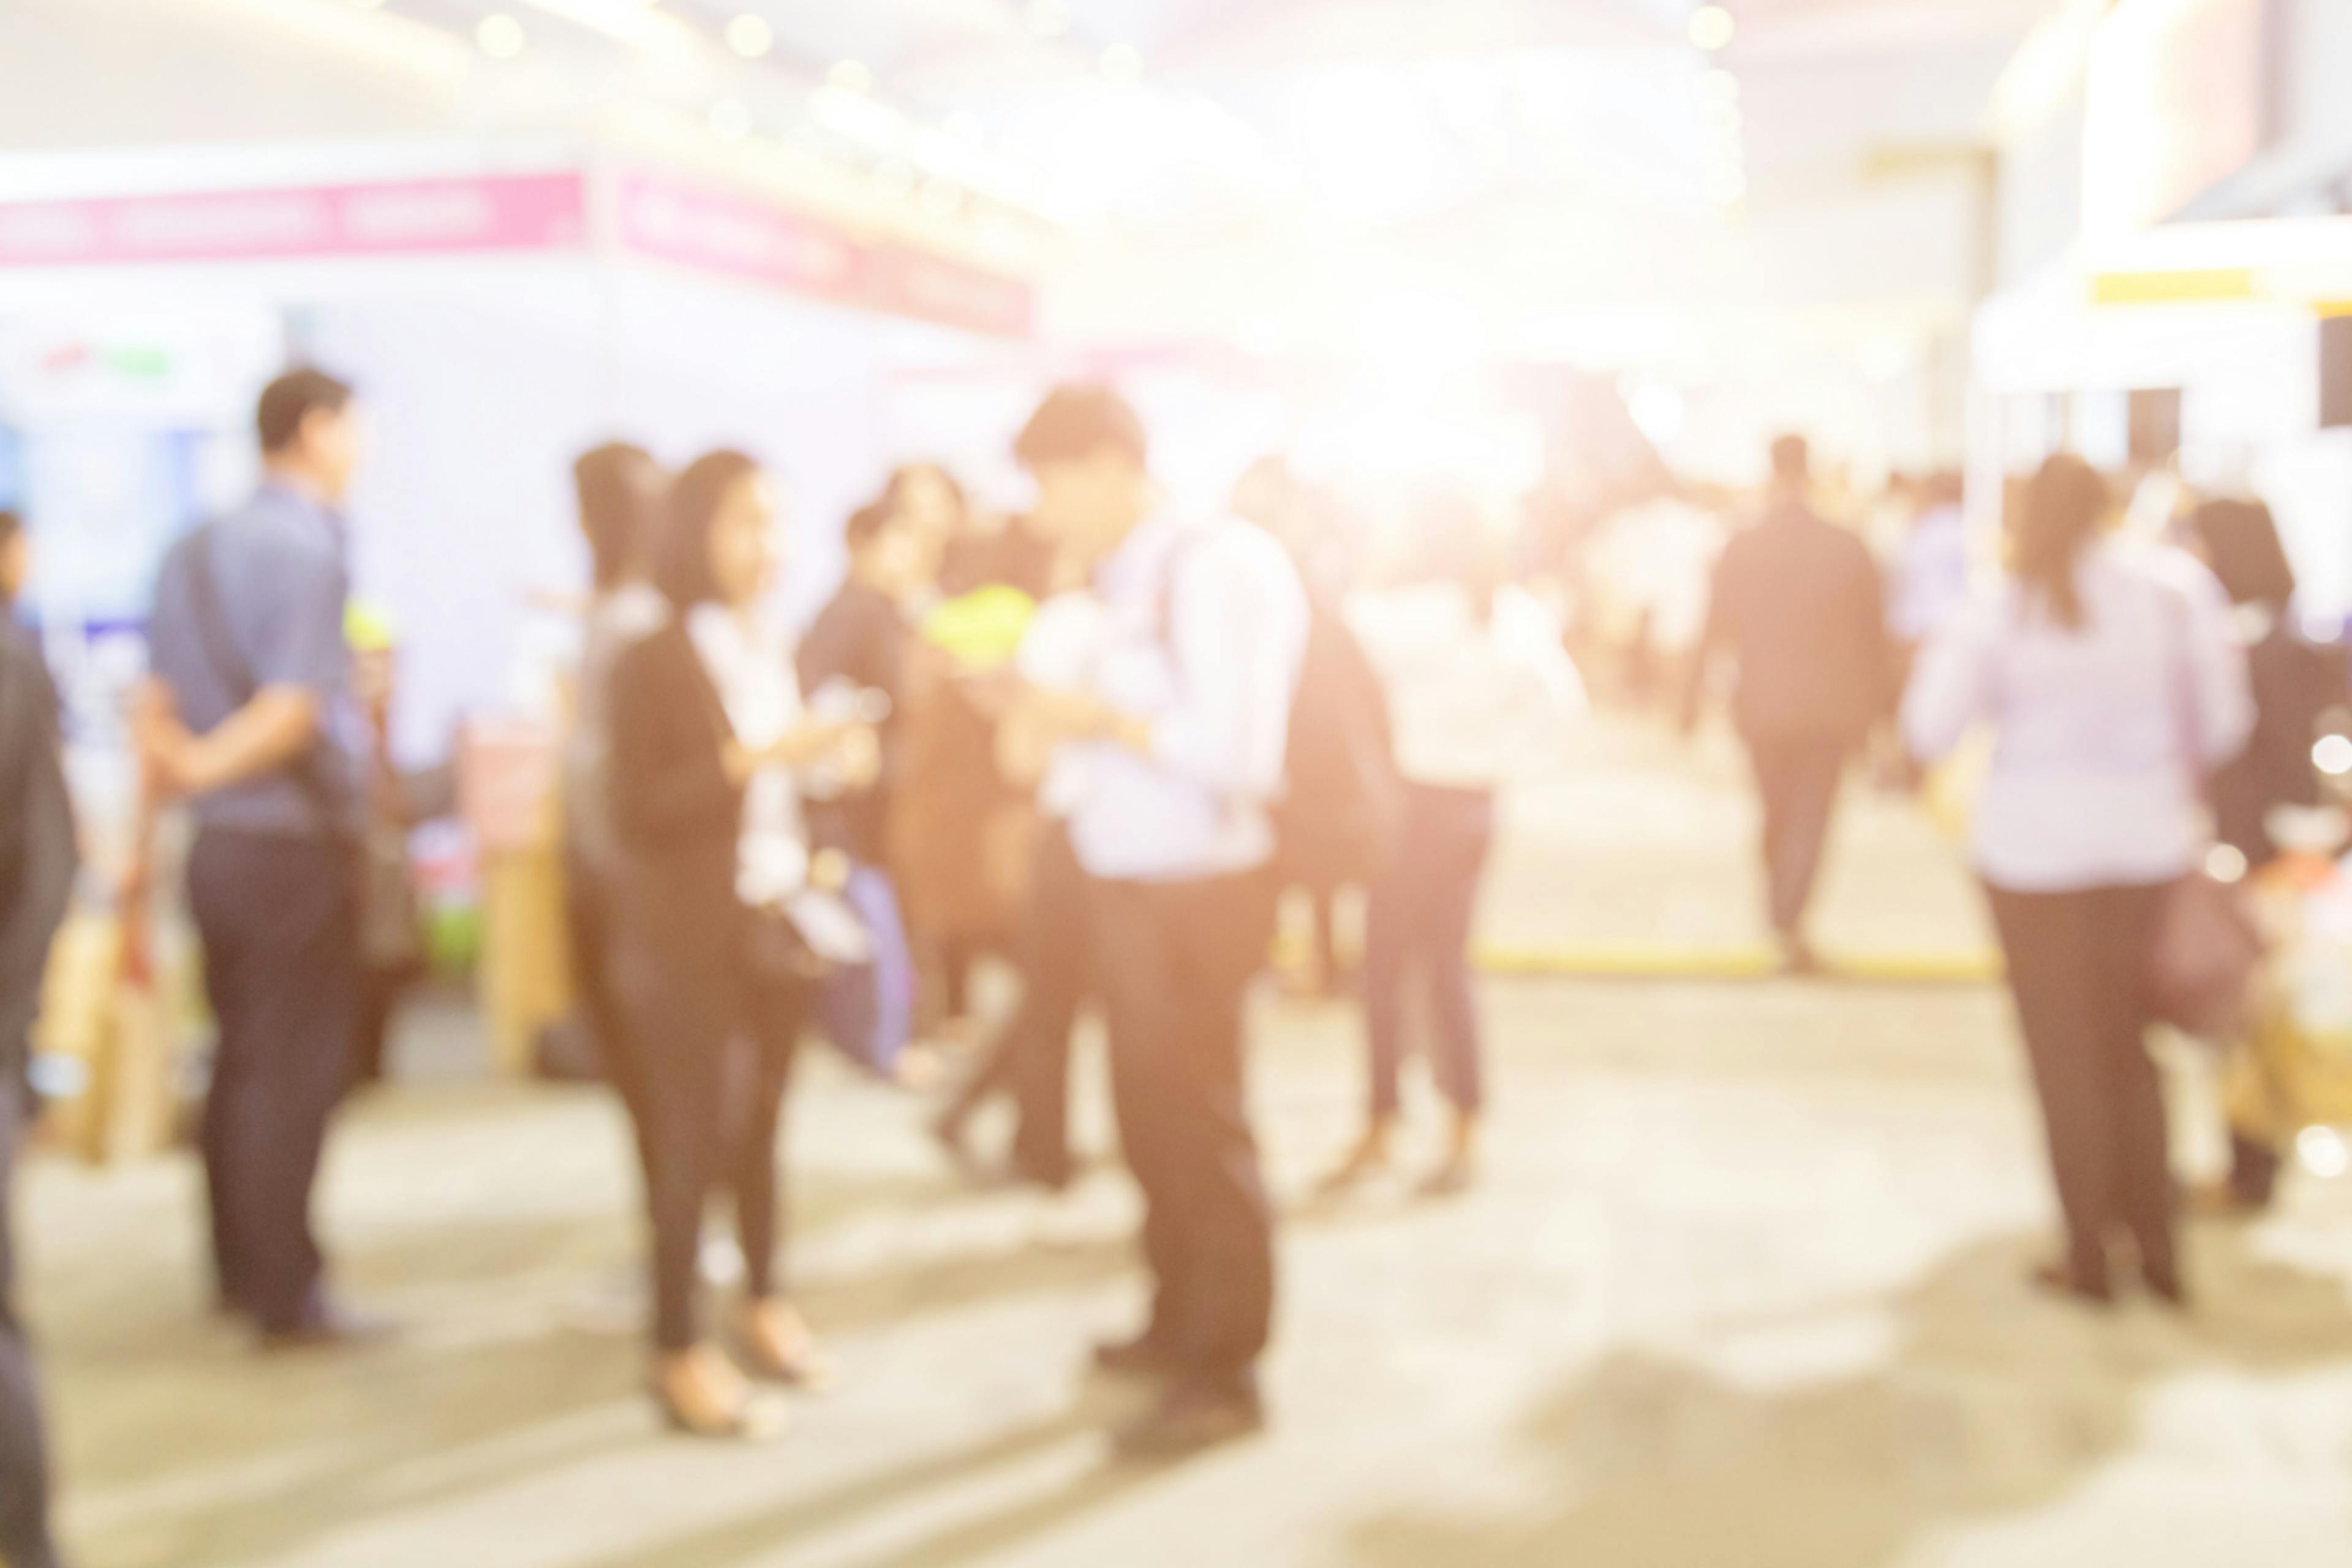 Blurred background of public exhibition hall. Business tradeshow, job fair, or stock market. Organization or company event, commercial trading, or shopping mall marketing advertisement concept | Image Credit: © PRASERT - stock.adobe.com